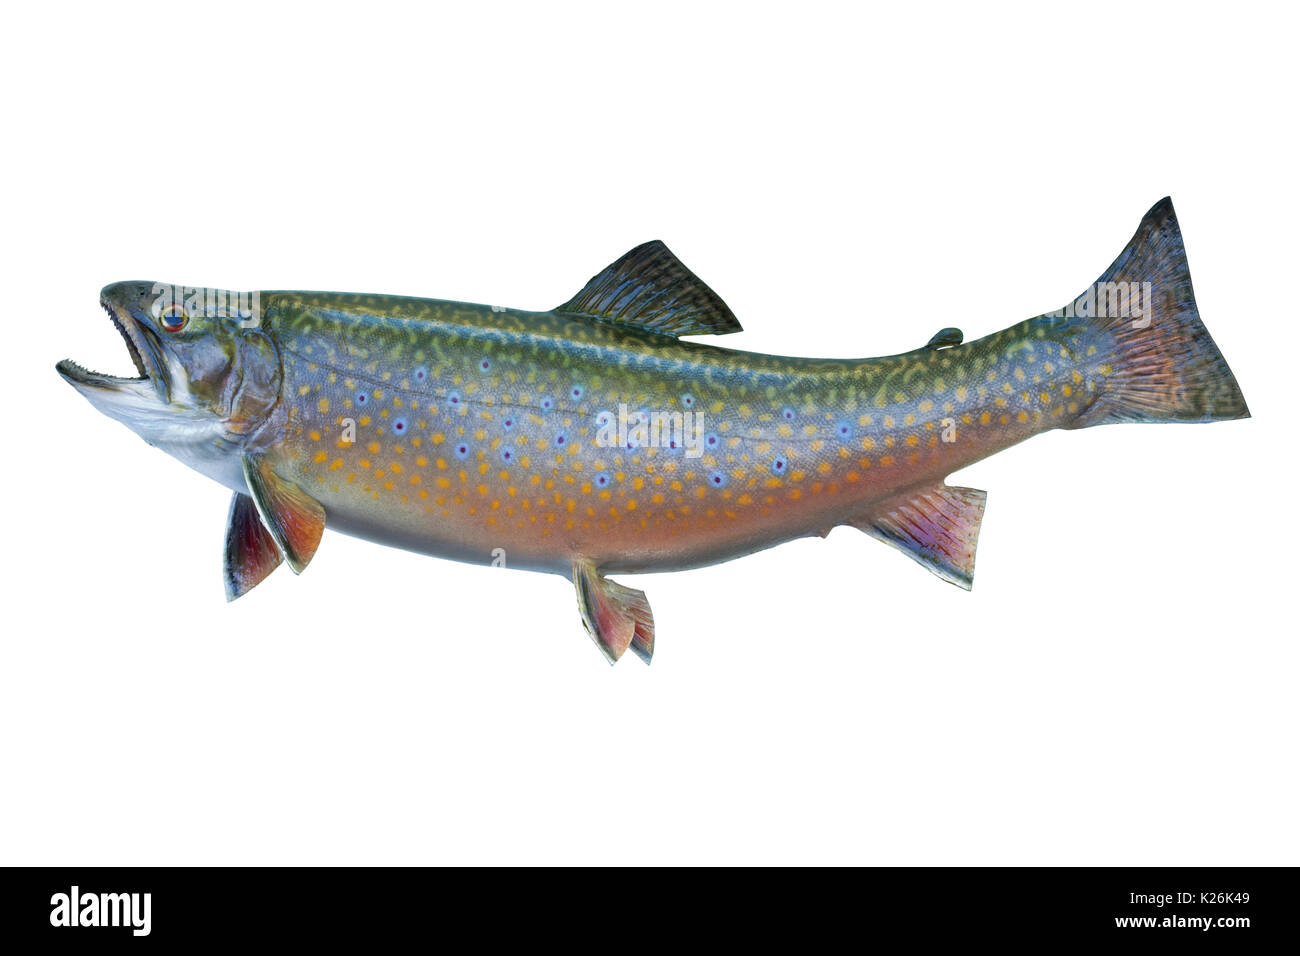 A speckled trout, also known as a brook trout, isolated on a white background Stock Photo